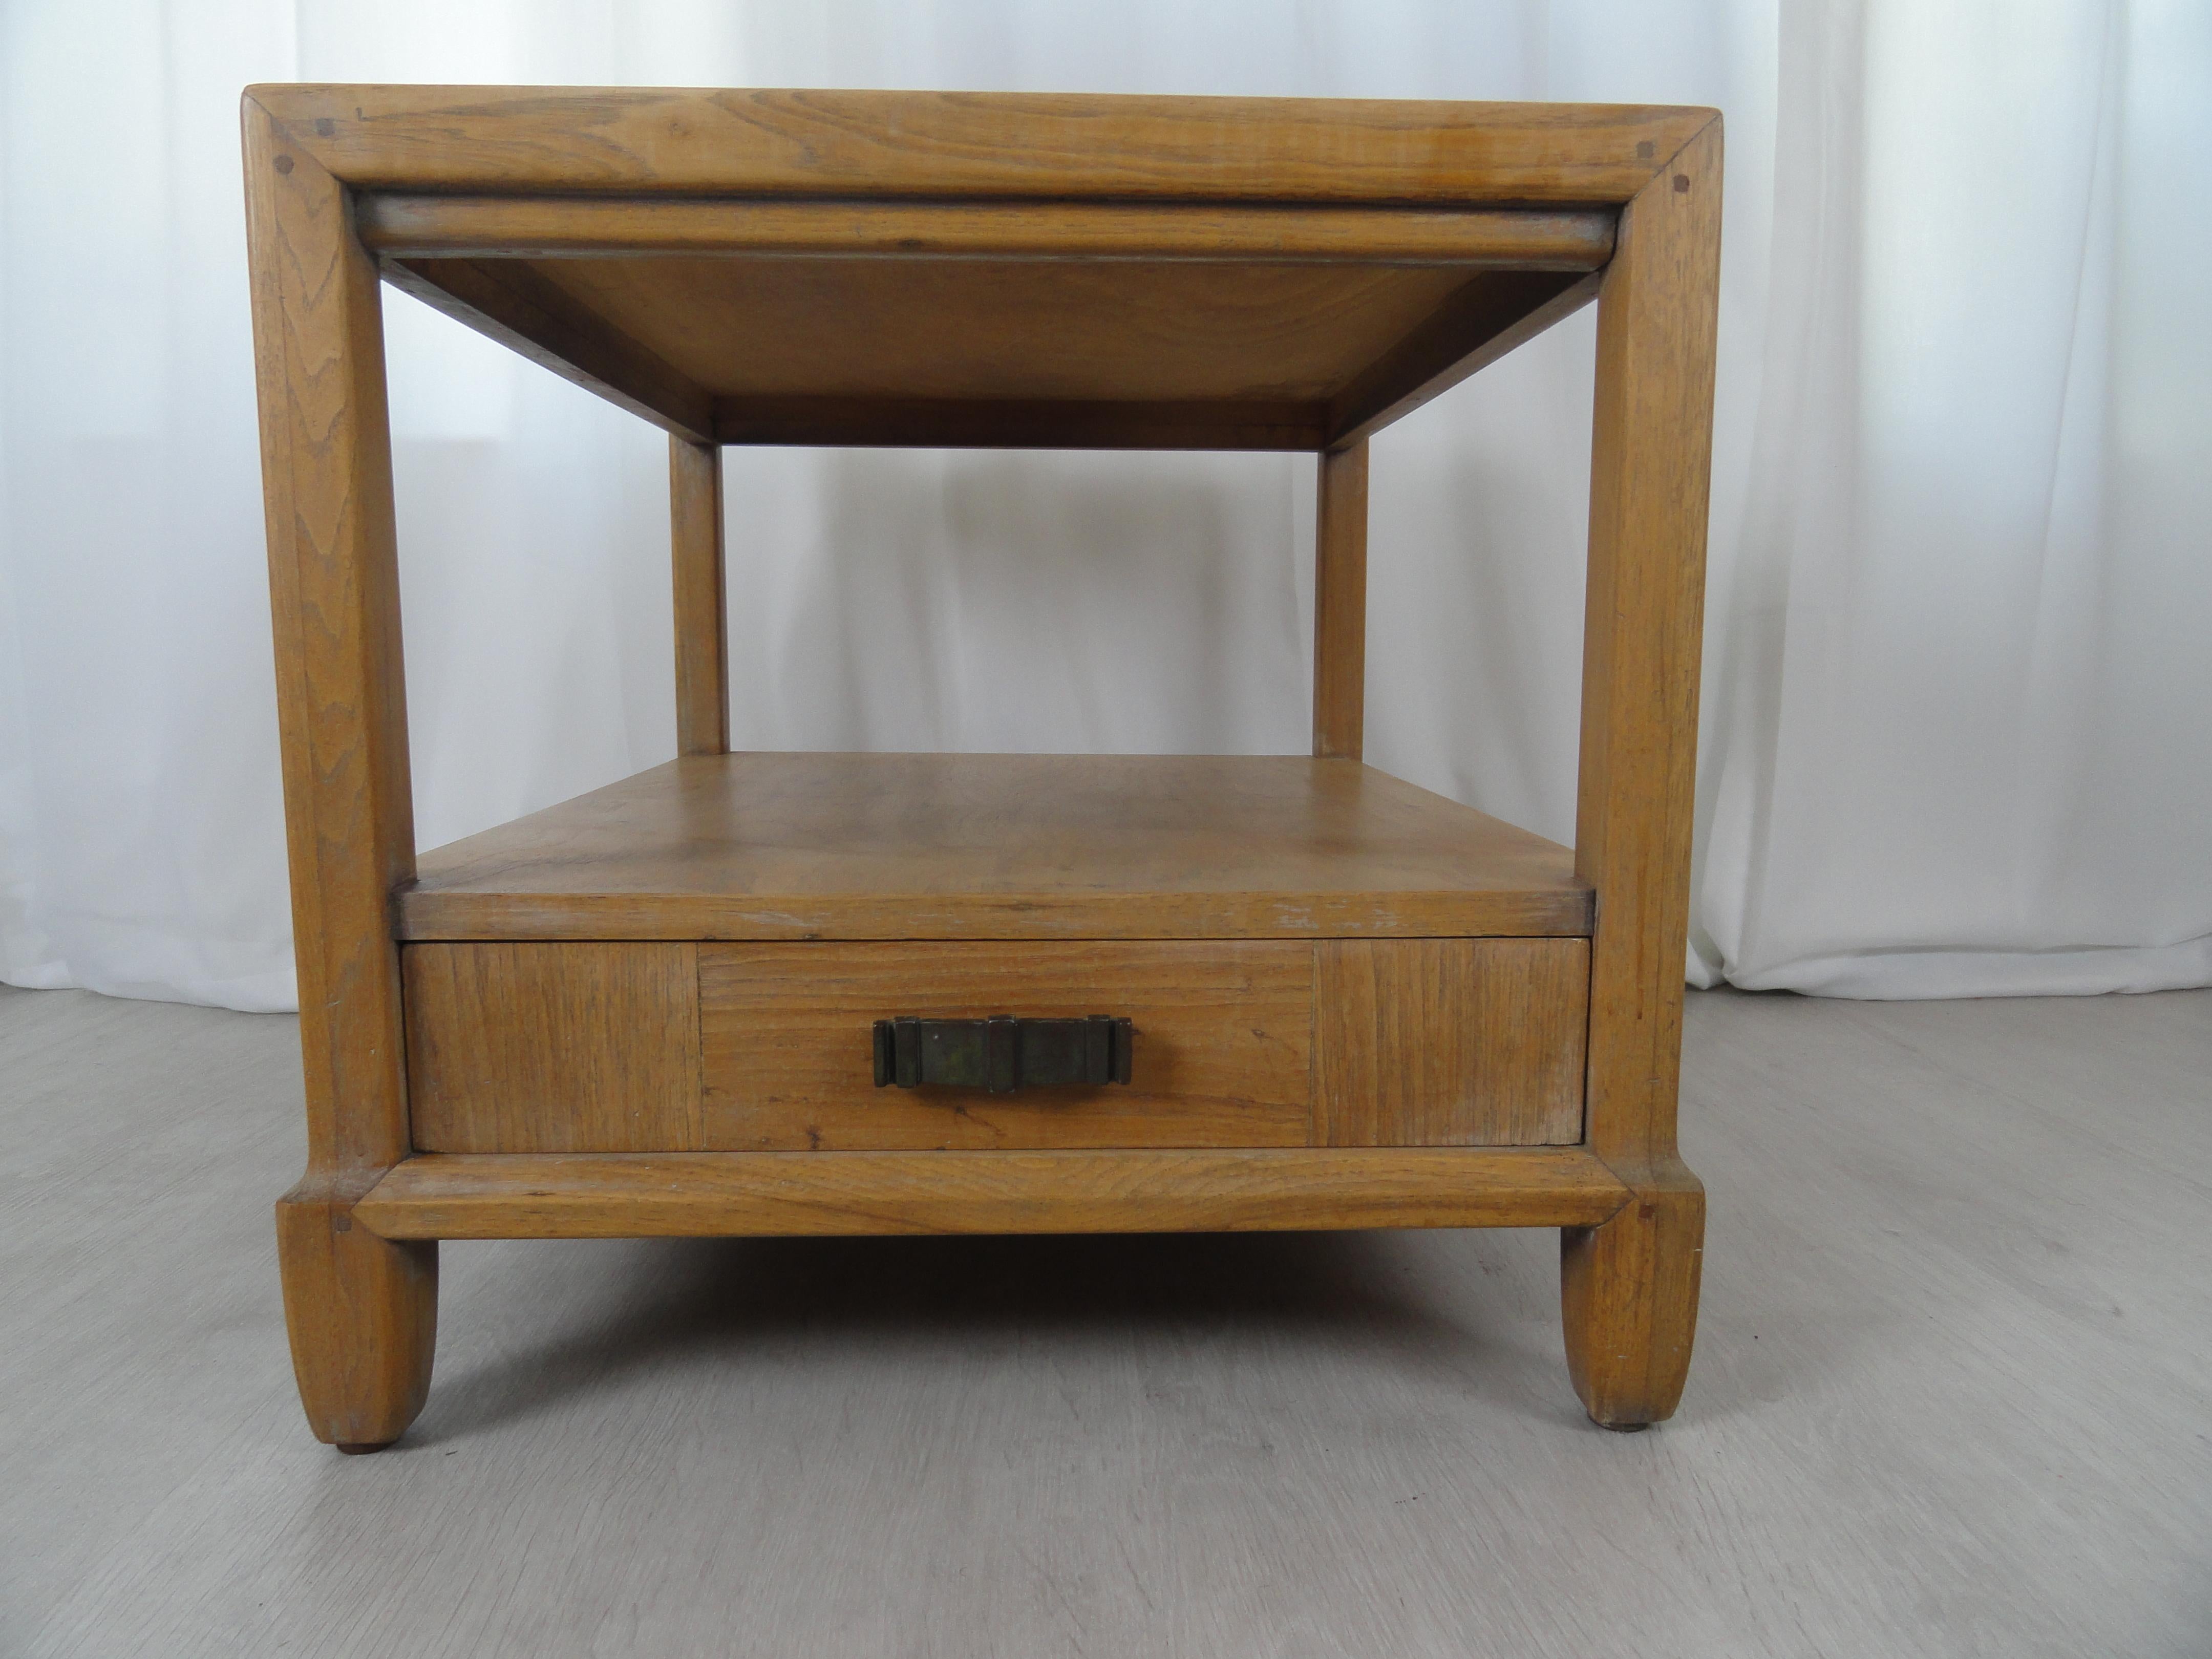 Century Furniture Ming style end table with inlaid top. Single drawer with original hardware.